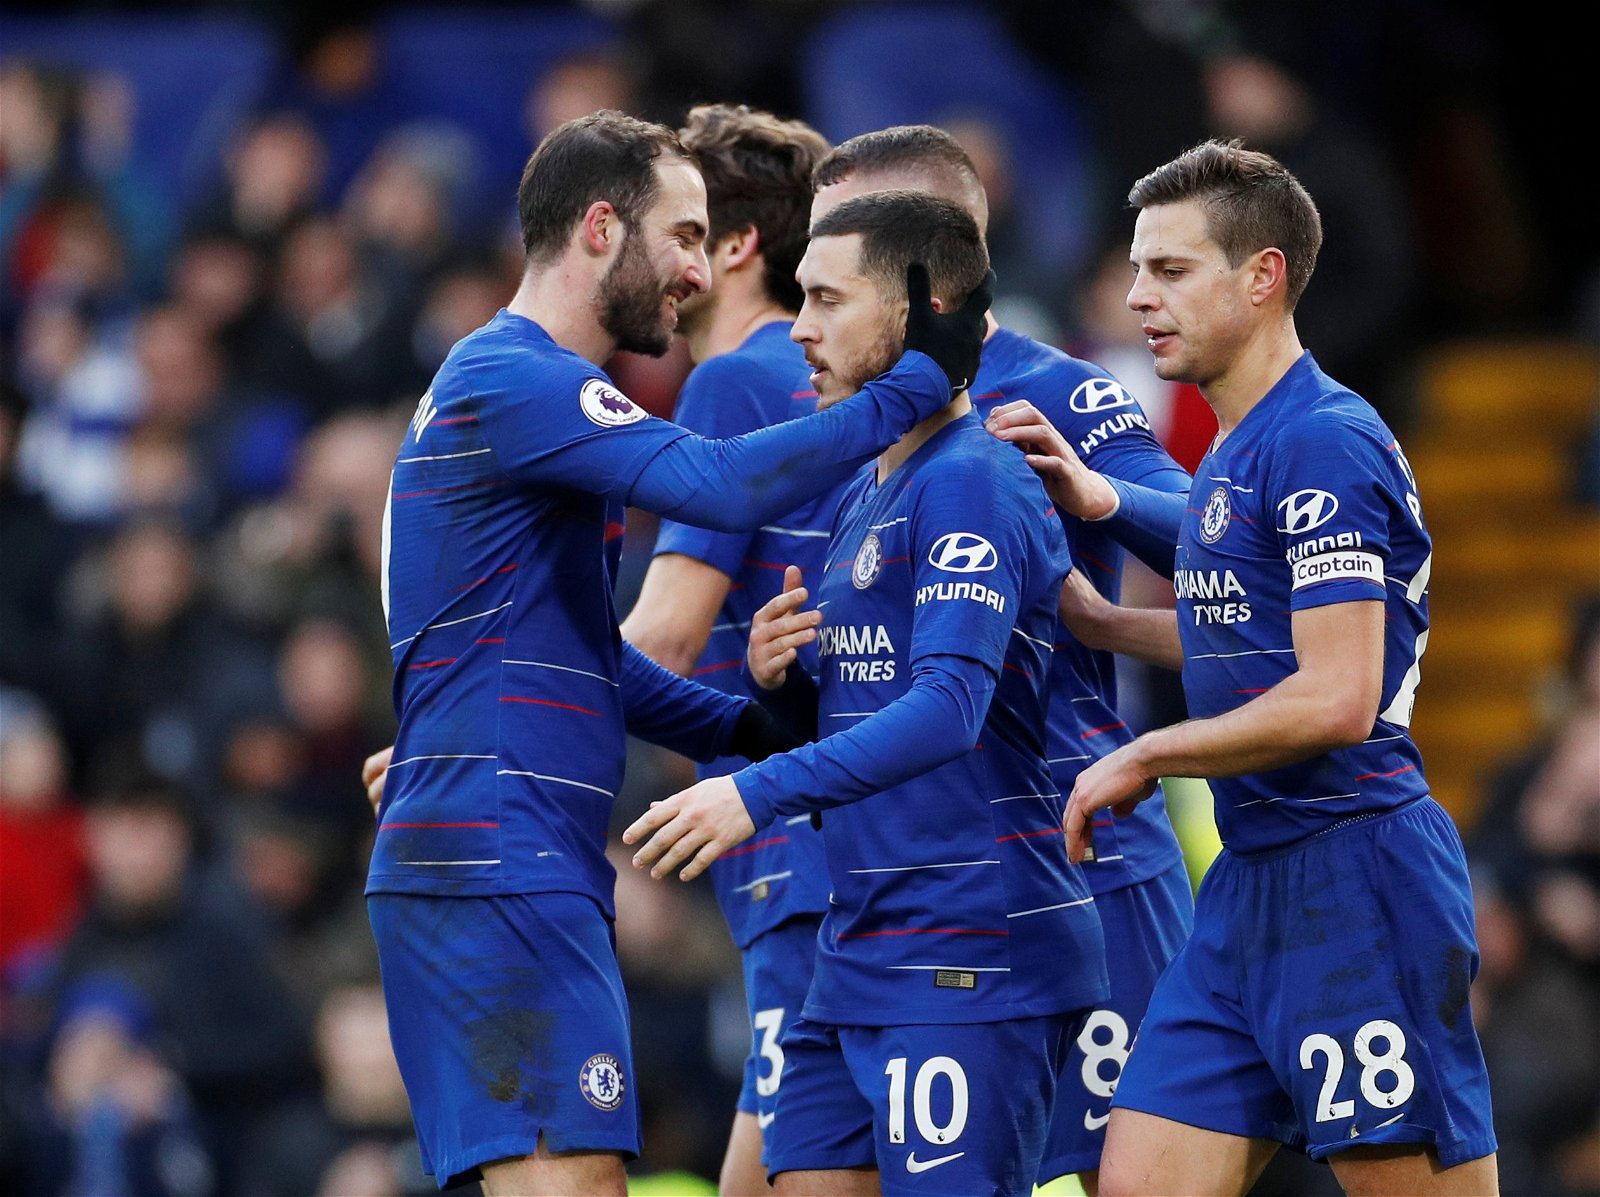 Hazard admits one thing Chelsea players are still doing under Sarri